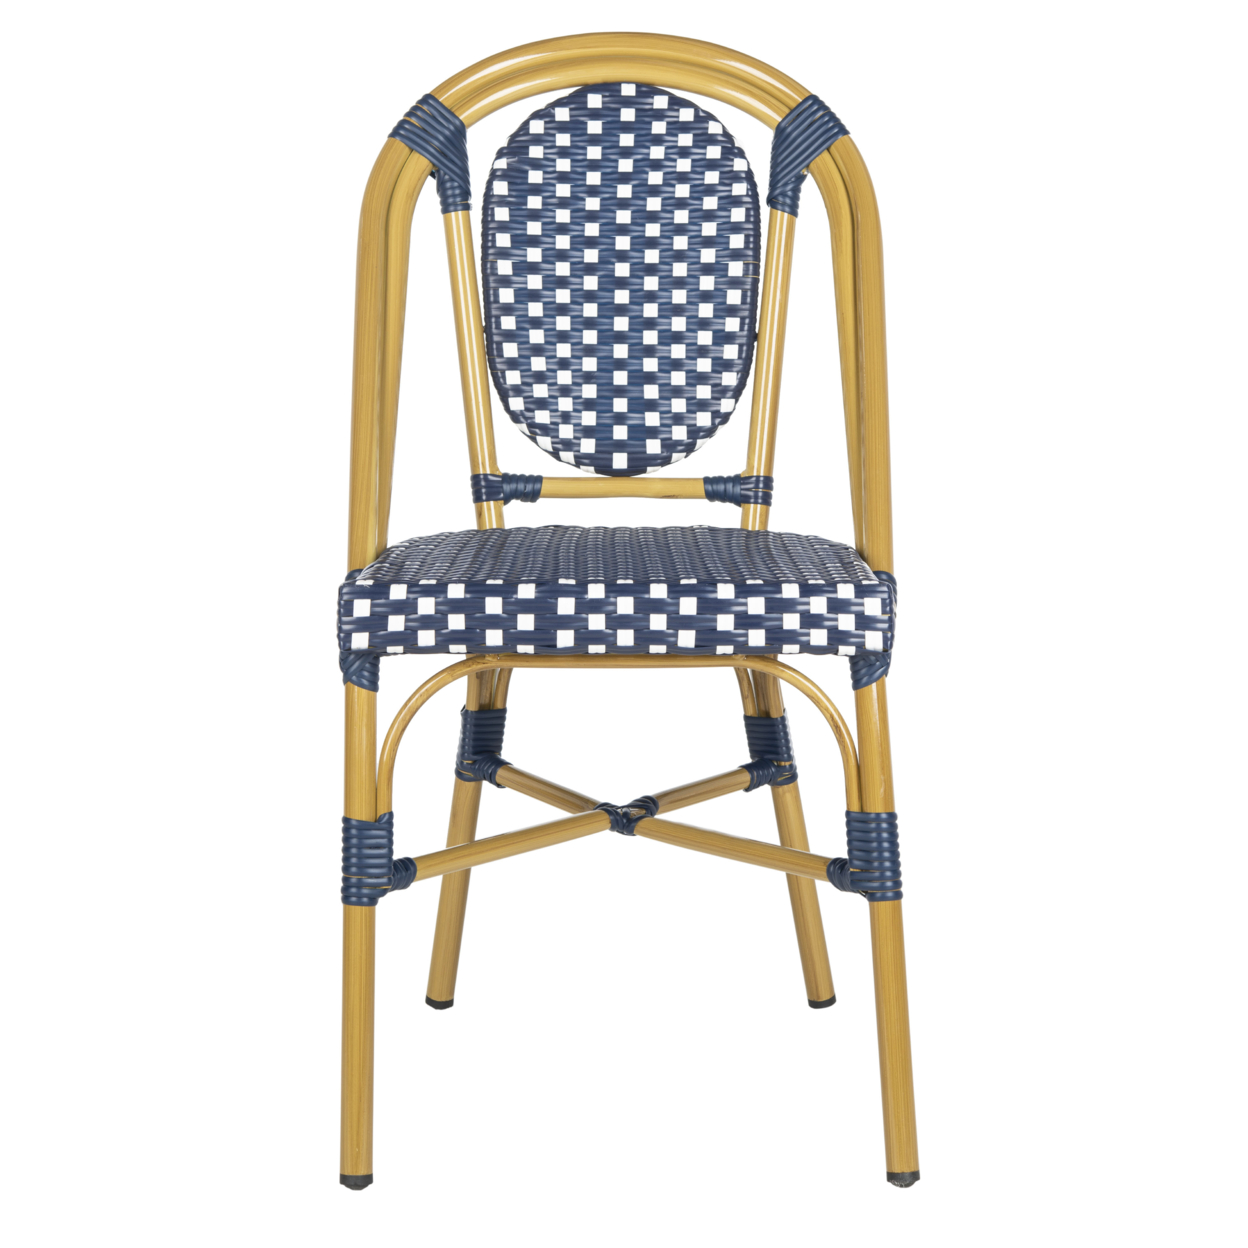 SAFAVIEH Lenda Outdoor Patio French Bistro Stackable Chair, Navy/White/Brown, Set of 2 - image 2 of 7